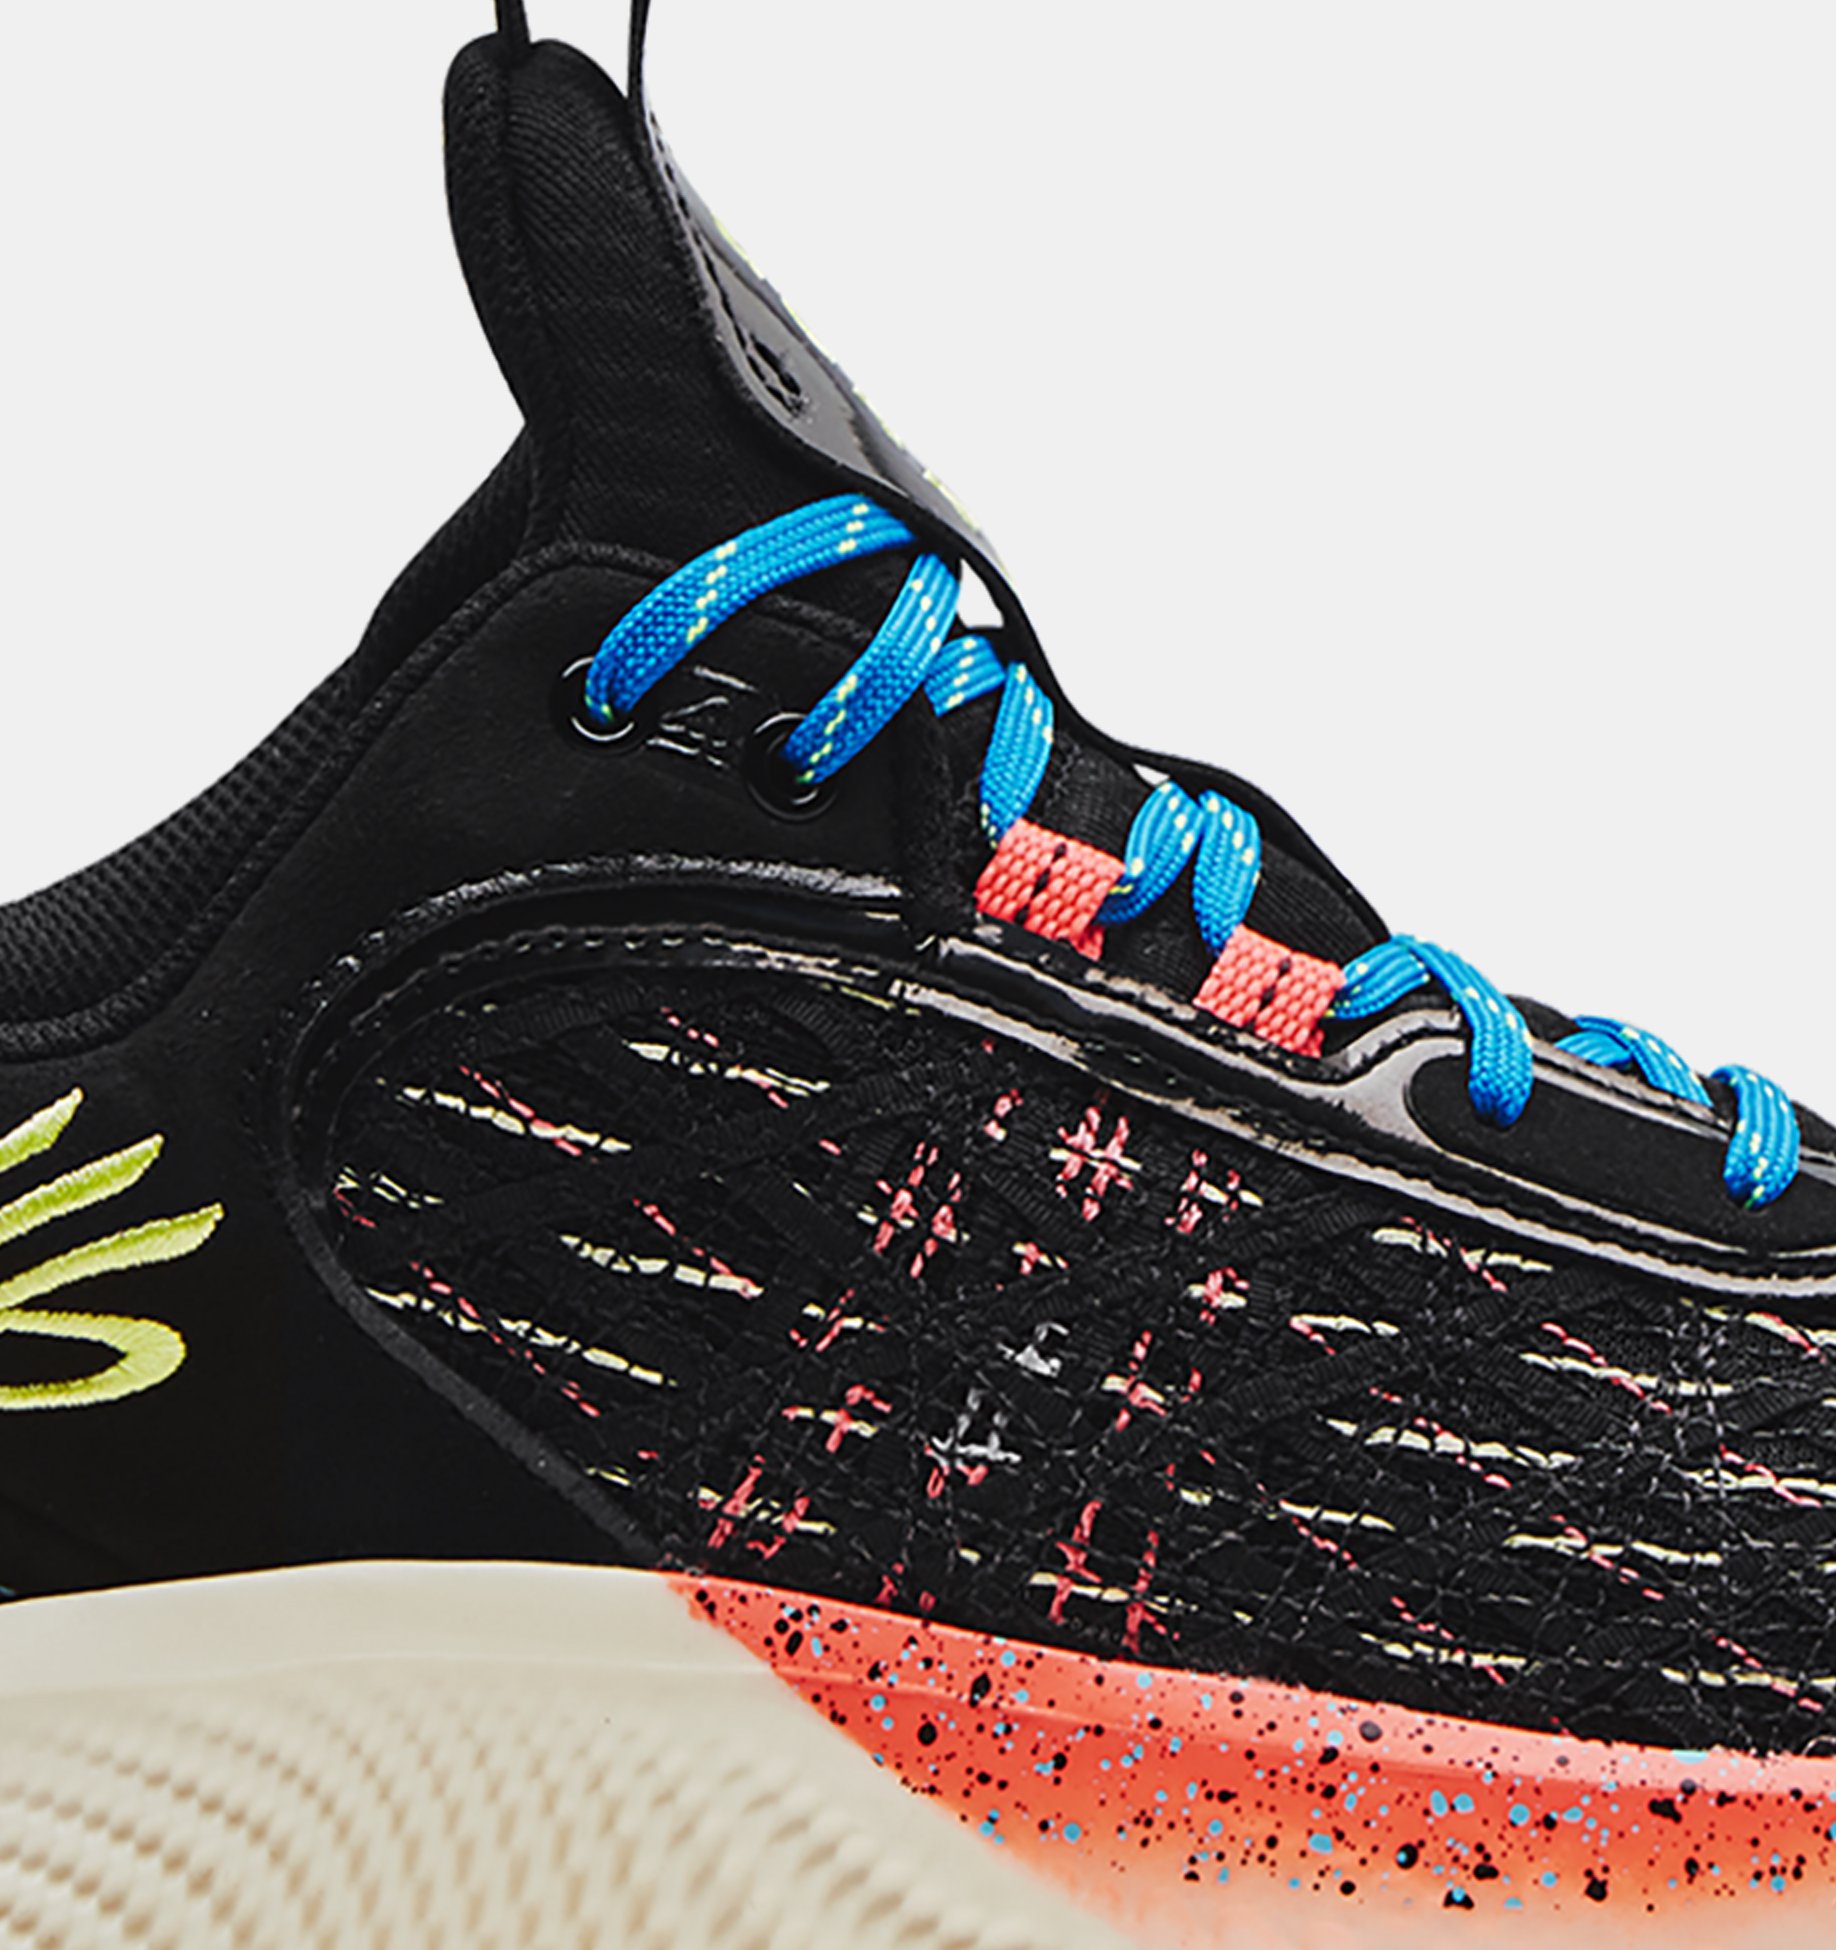 Unisex Curry Flow 9 Basketball Shoes | Under Armour